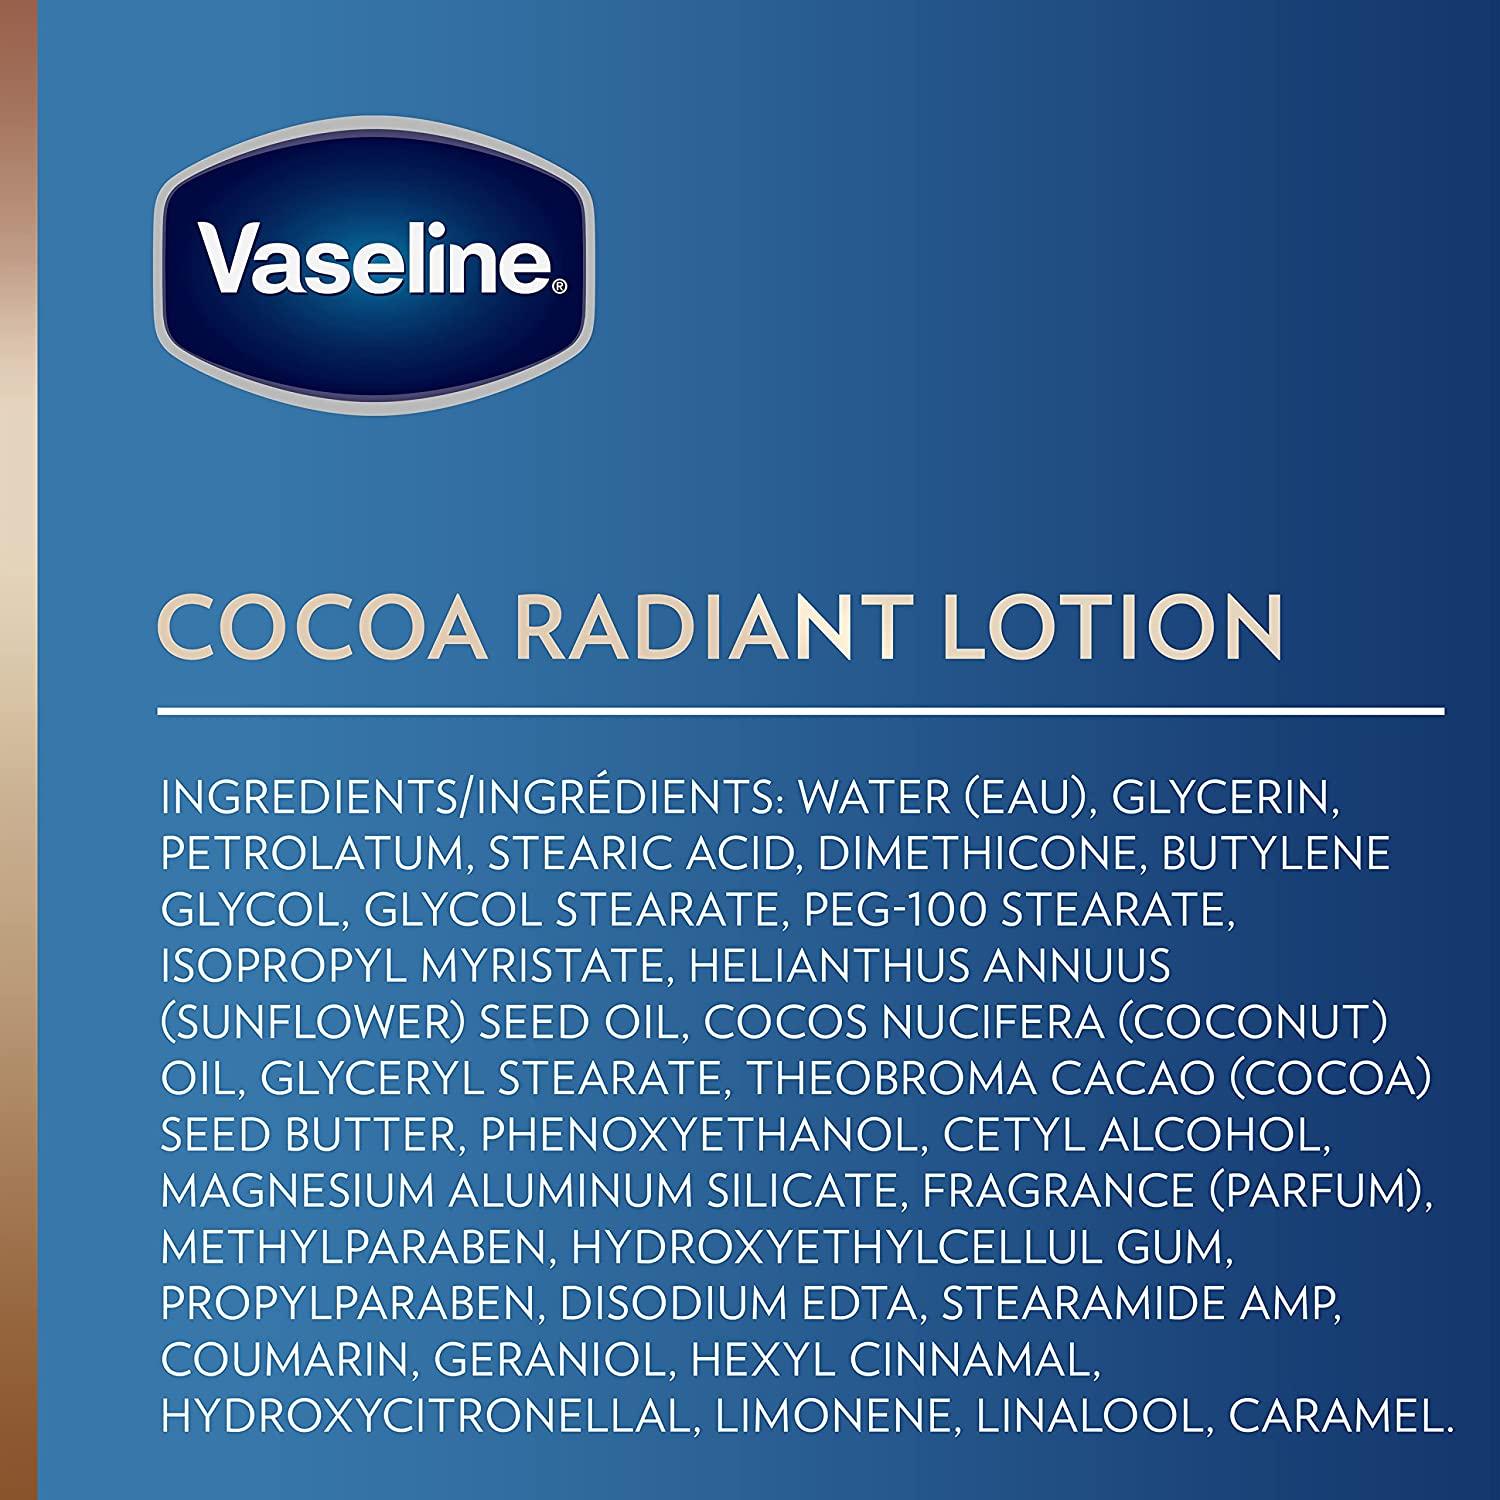 Vaseline Intensive Care Body Lotion for Skin Cocoa Radiant Lotion Made with Ultra-Hydrating and Pure Cocoa Butter for a Long-Lasting, Radiant Glow 20.3 oz, Pack of 3